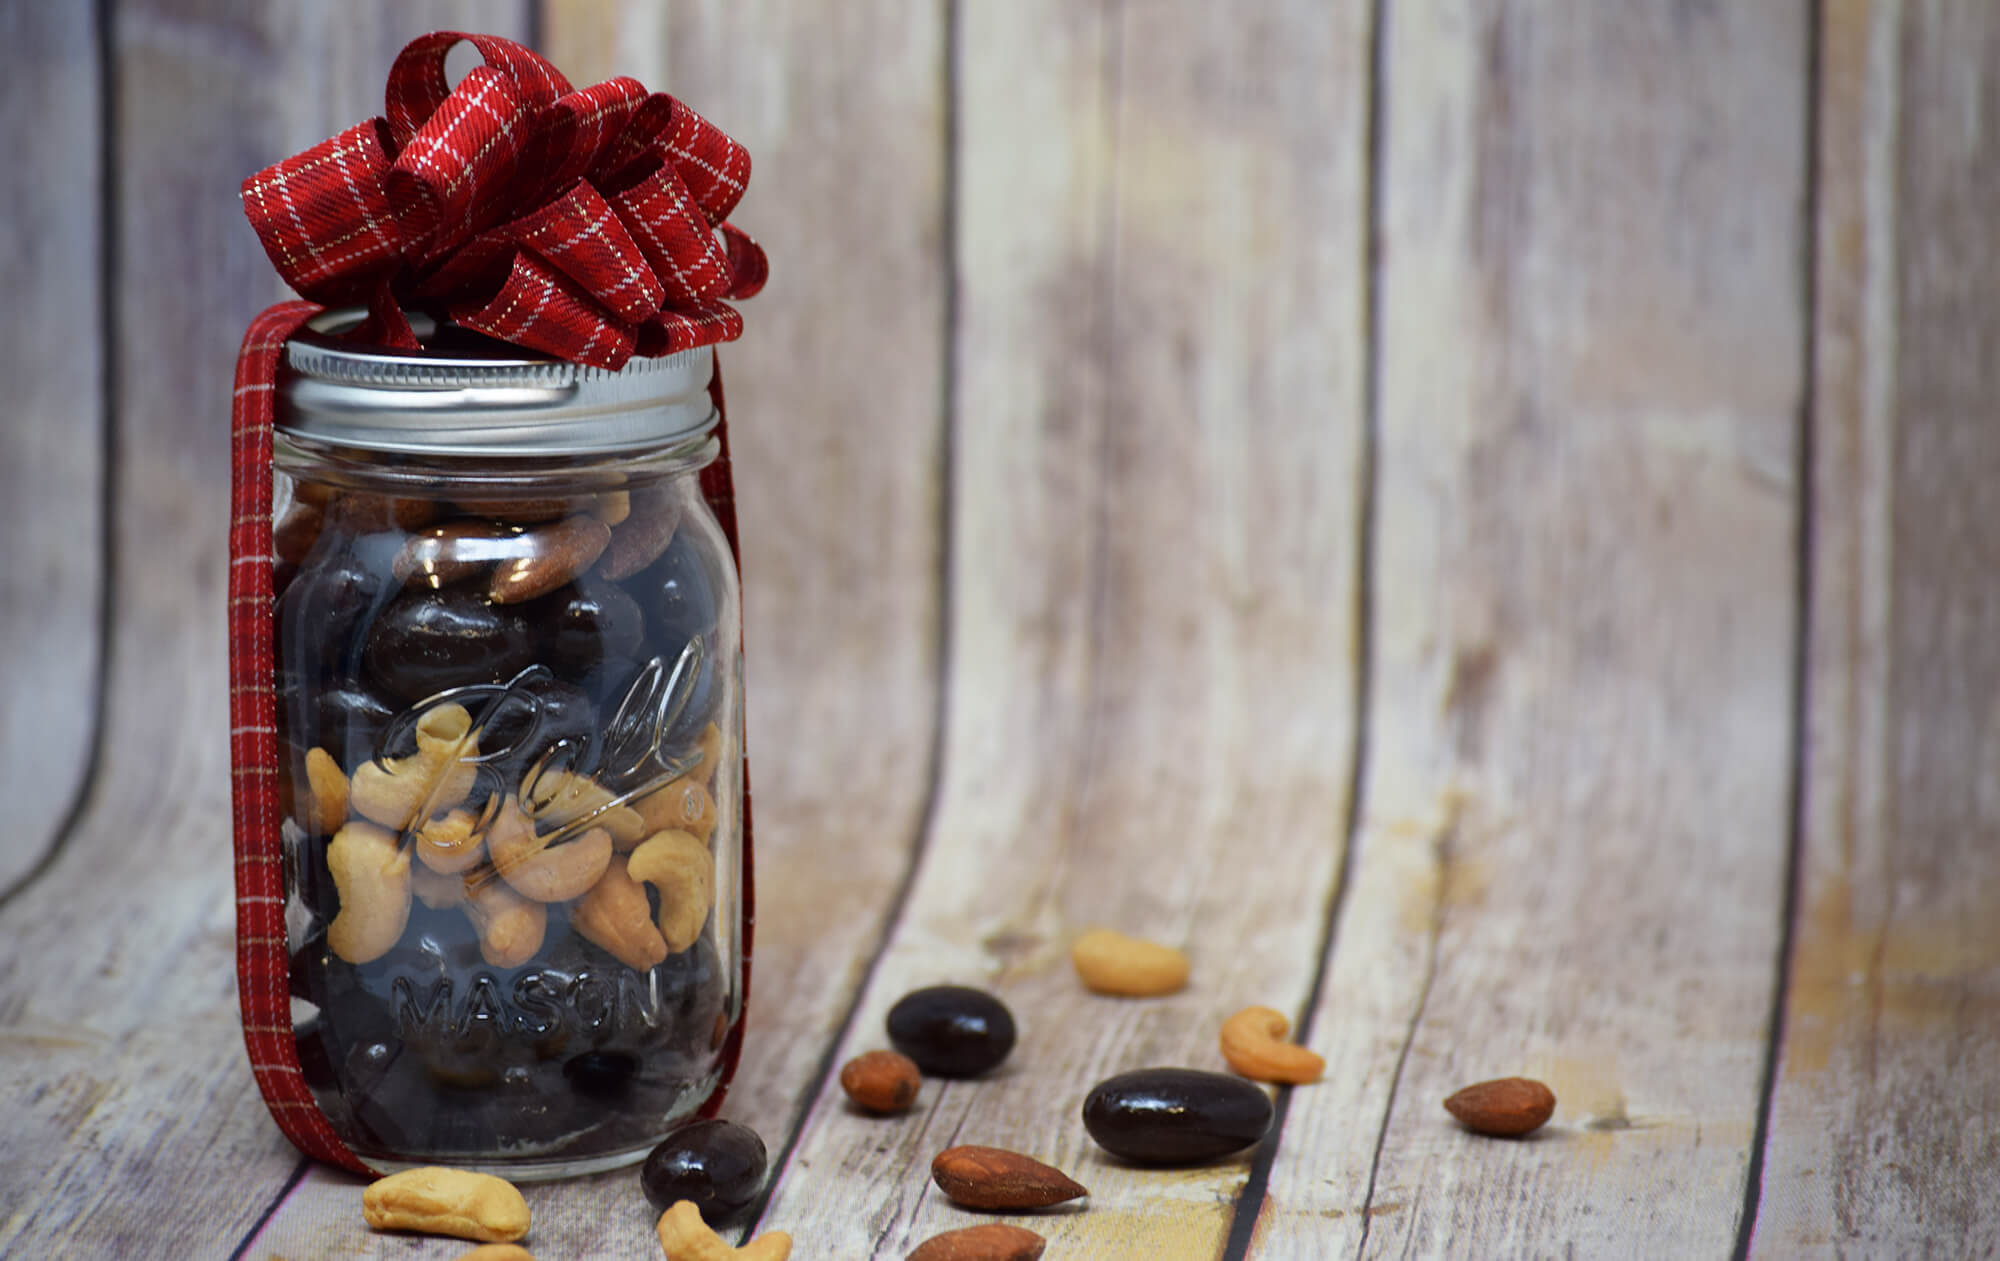 A mason jar filled with mixed nuts and chocolate tied with a bow on a wooden backdrop